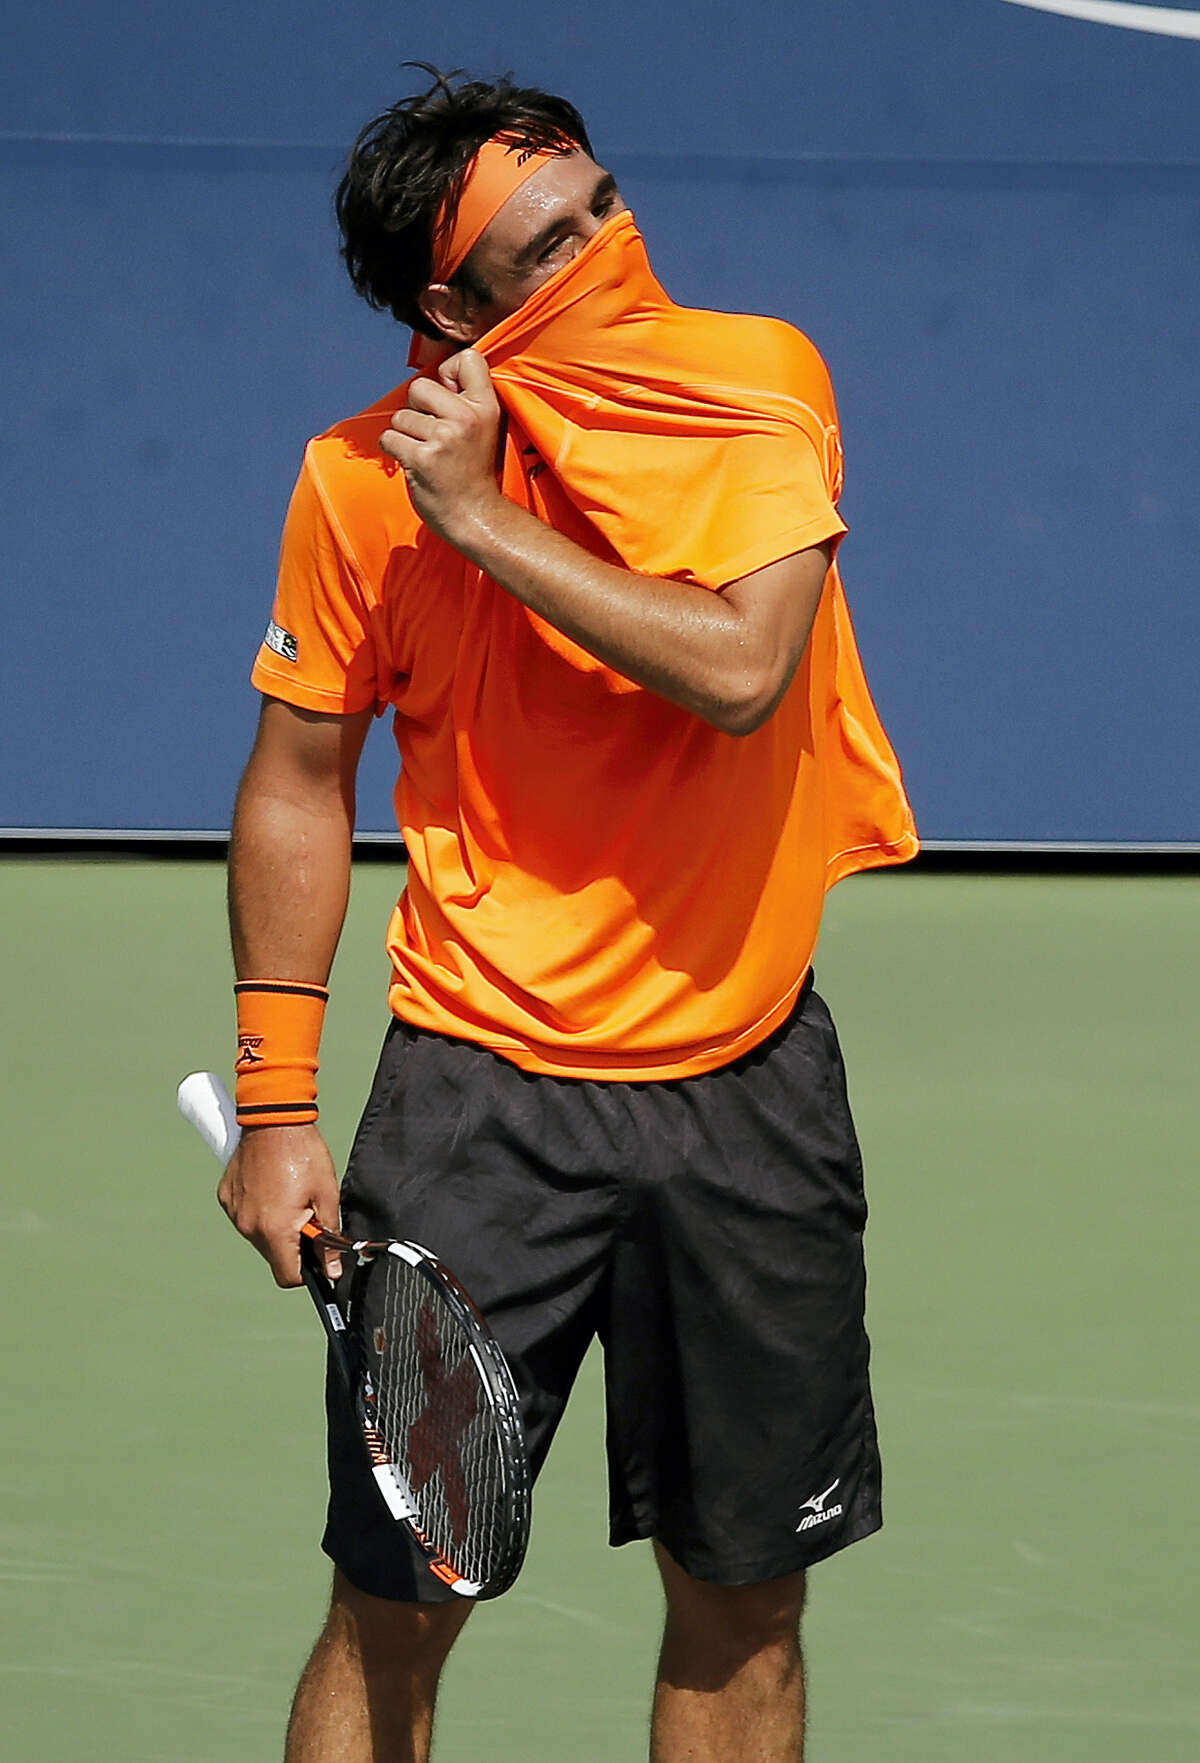 Marcos Baghdatis reacts after a point against Gael Monfils on Sunday.